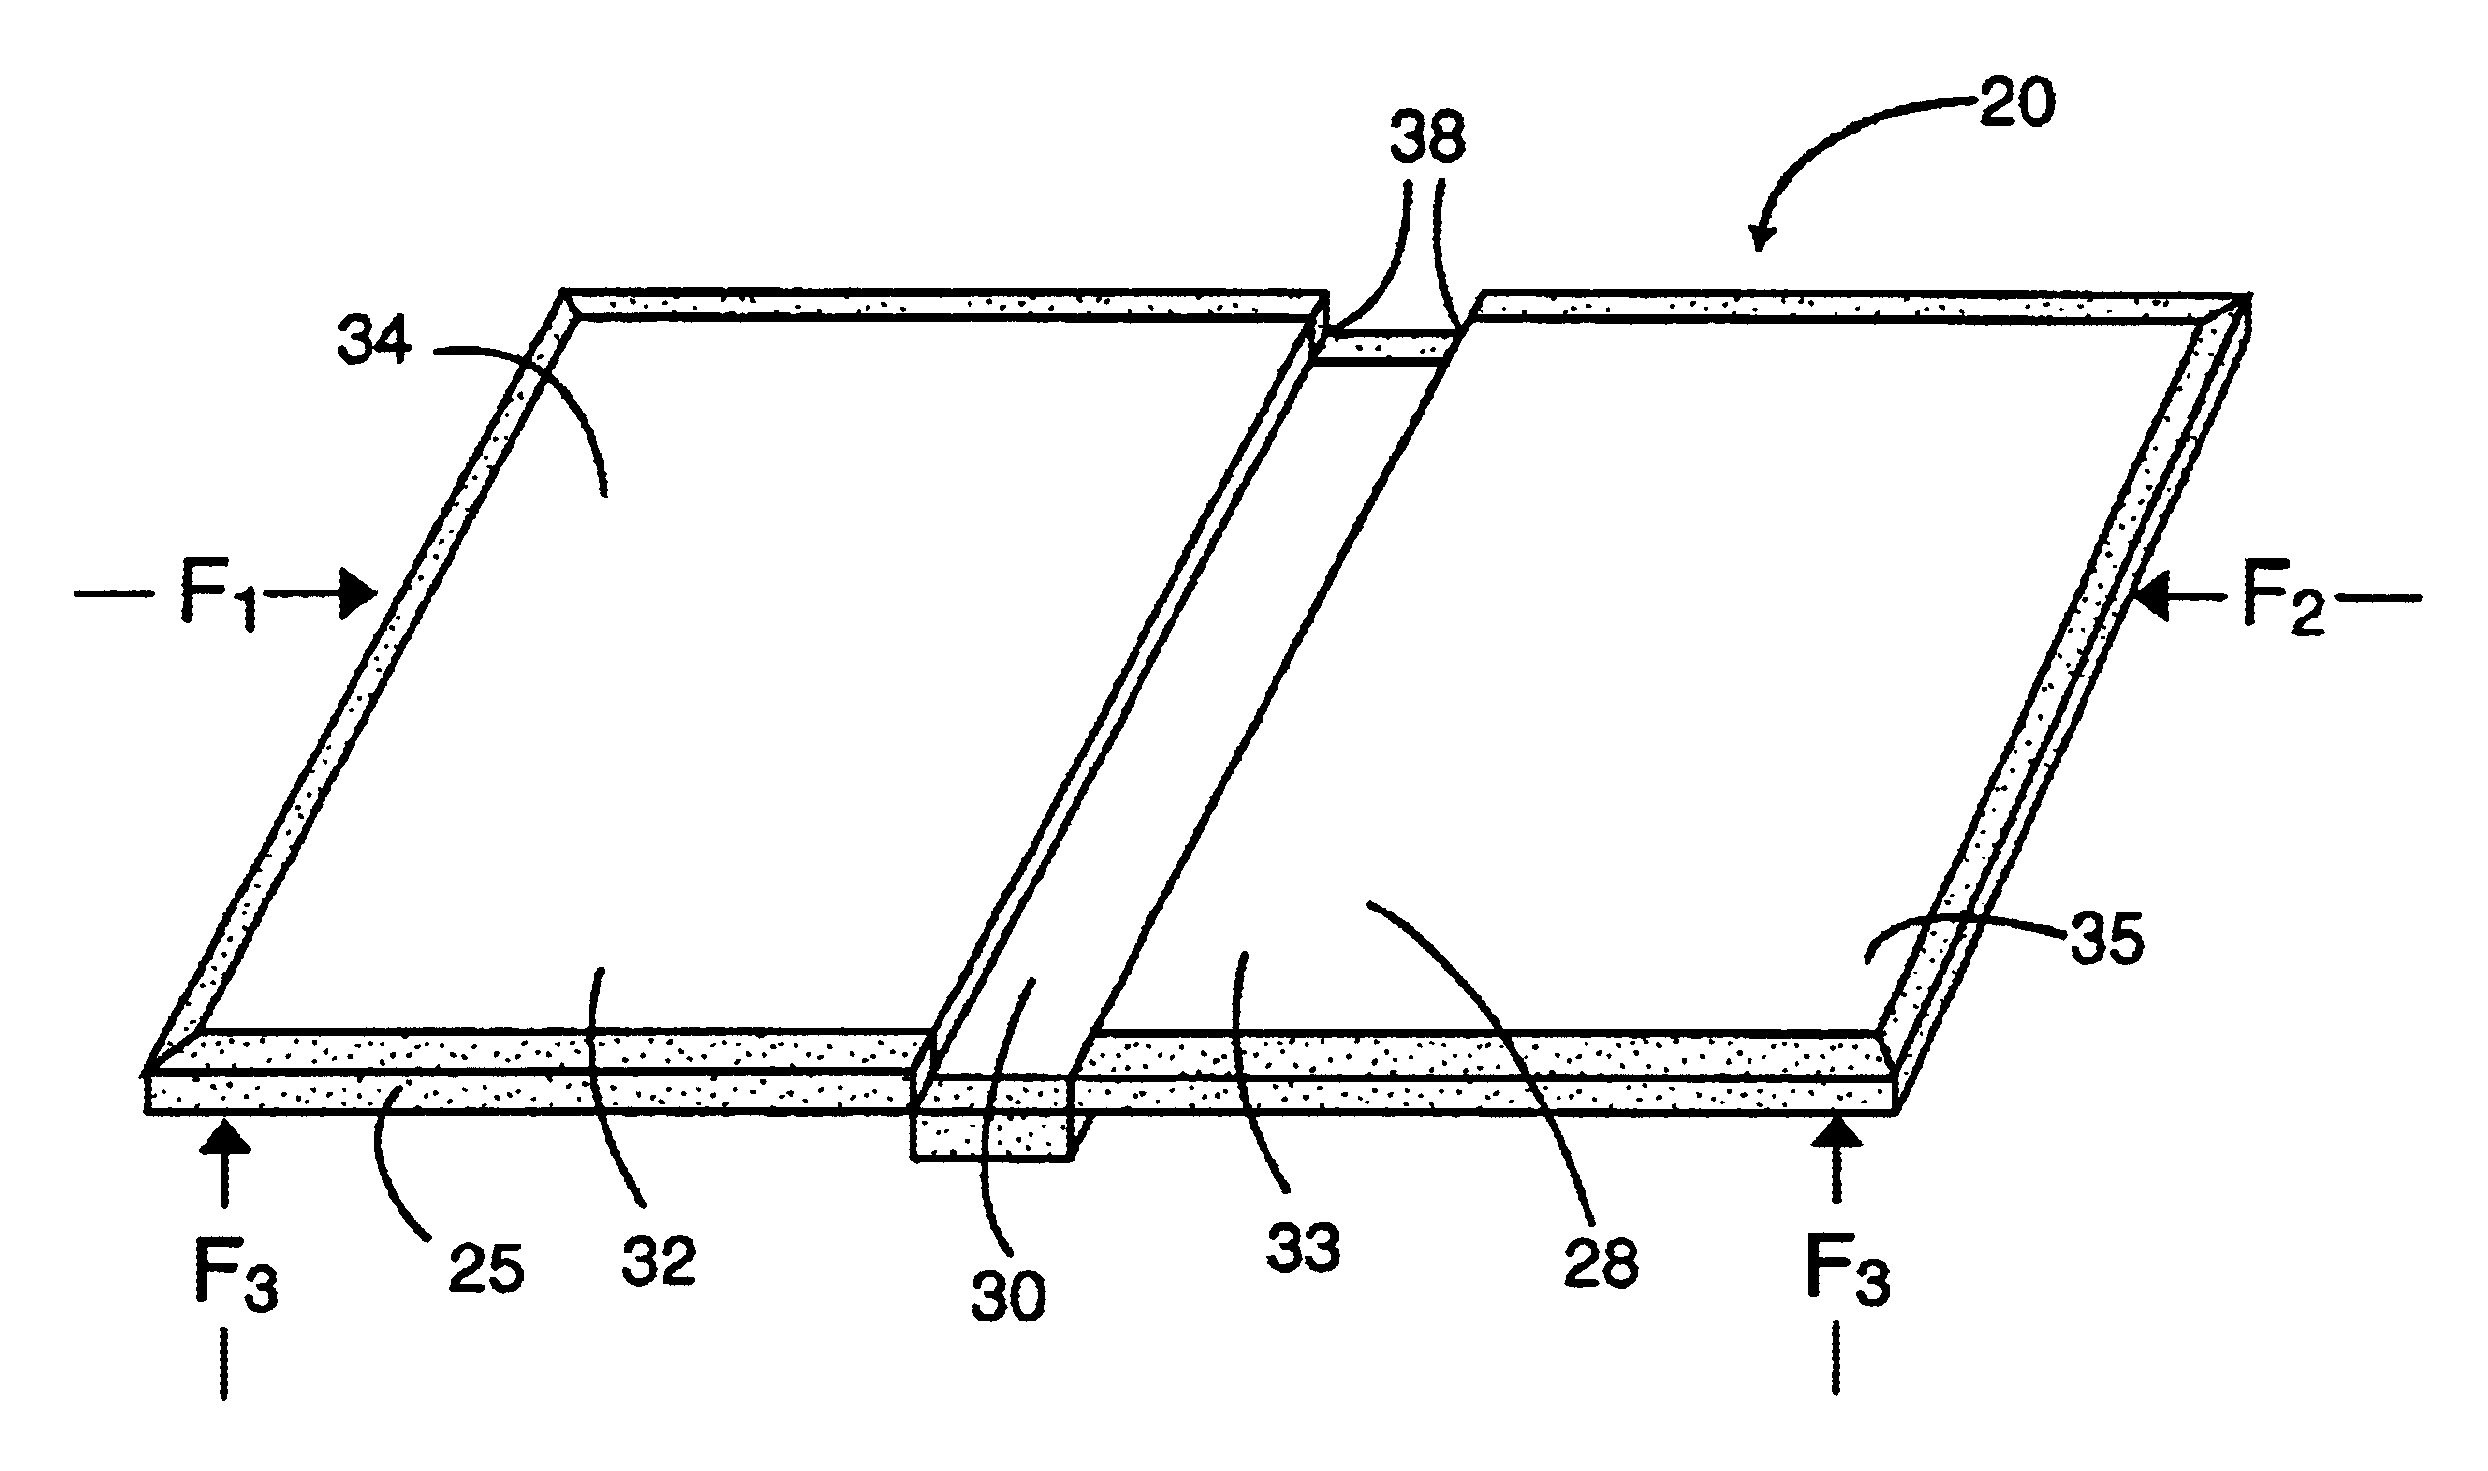 Outside-hinged cover for protecting articles stored therein and method for fabricating same